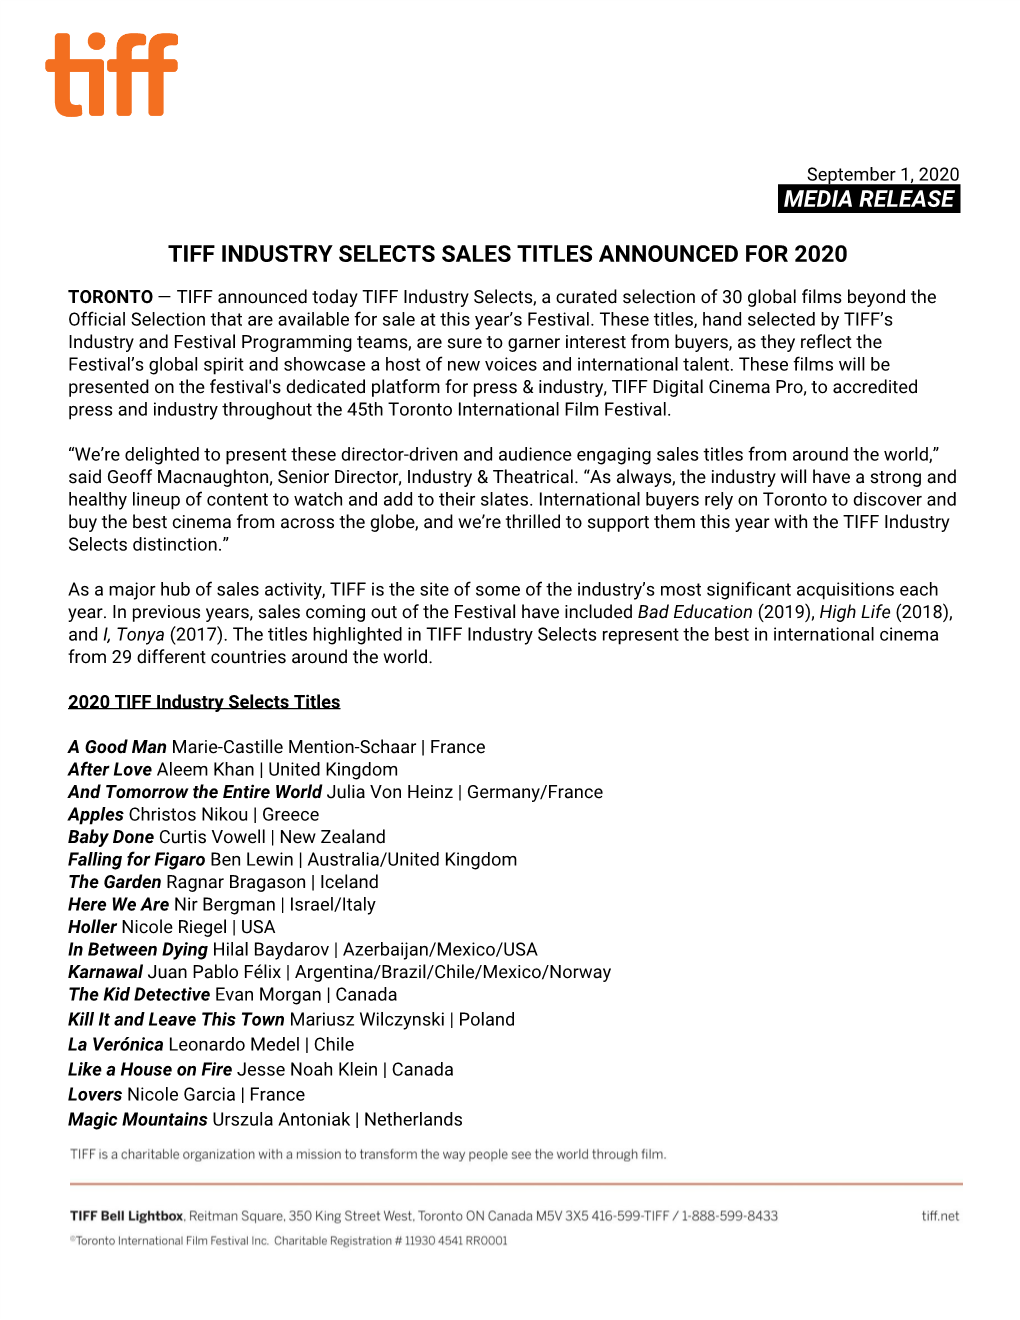 Media Release​. Tiff Industry Selects Sales Titles